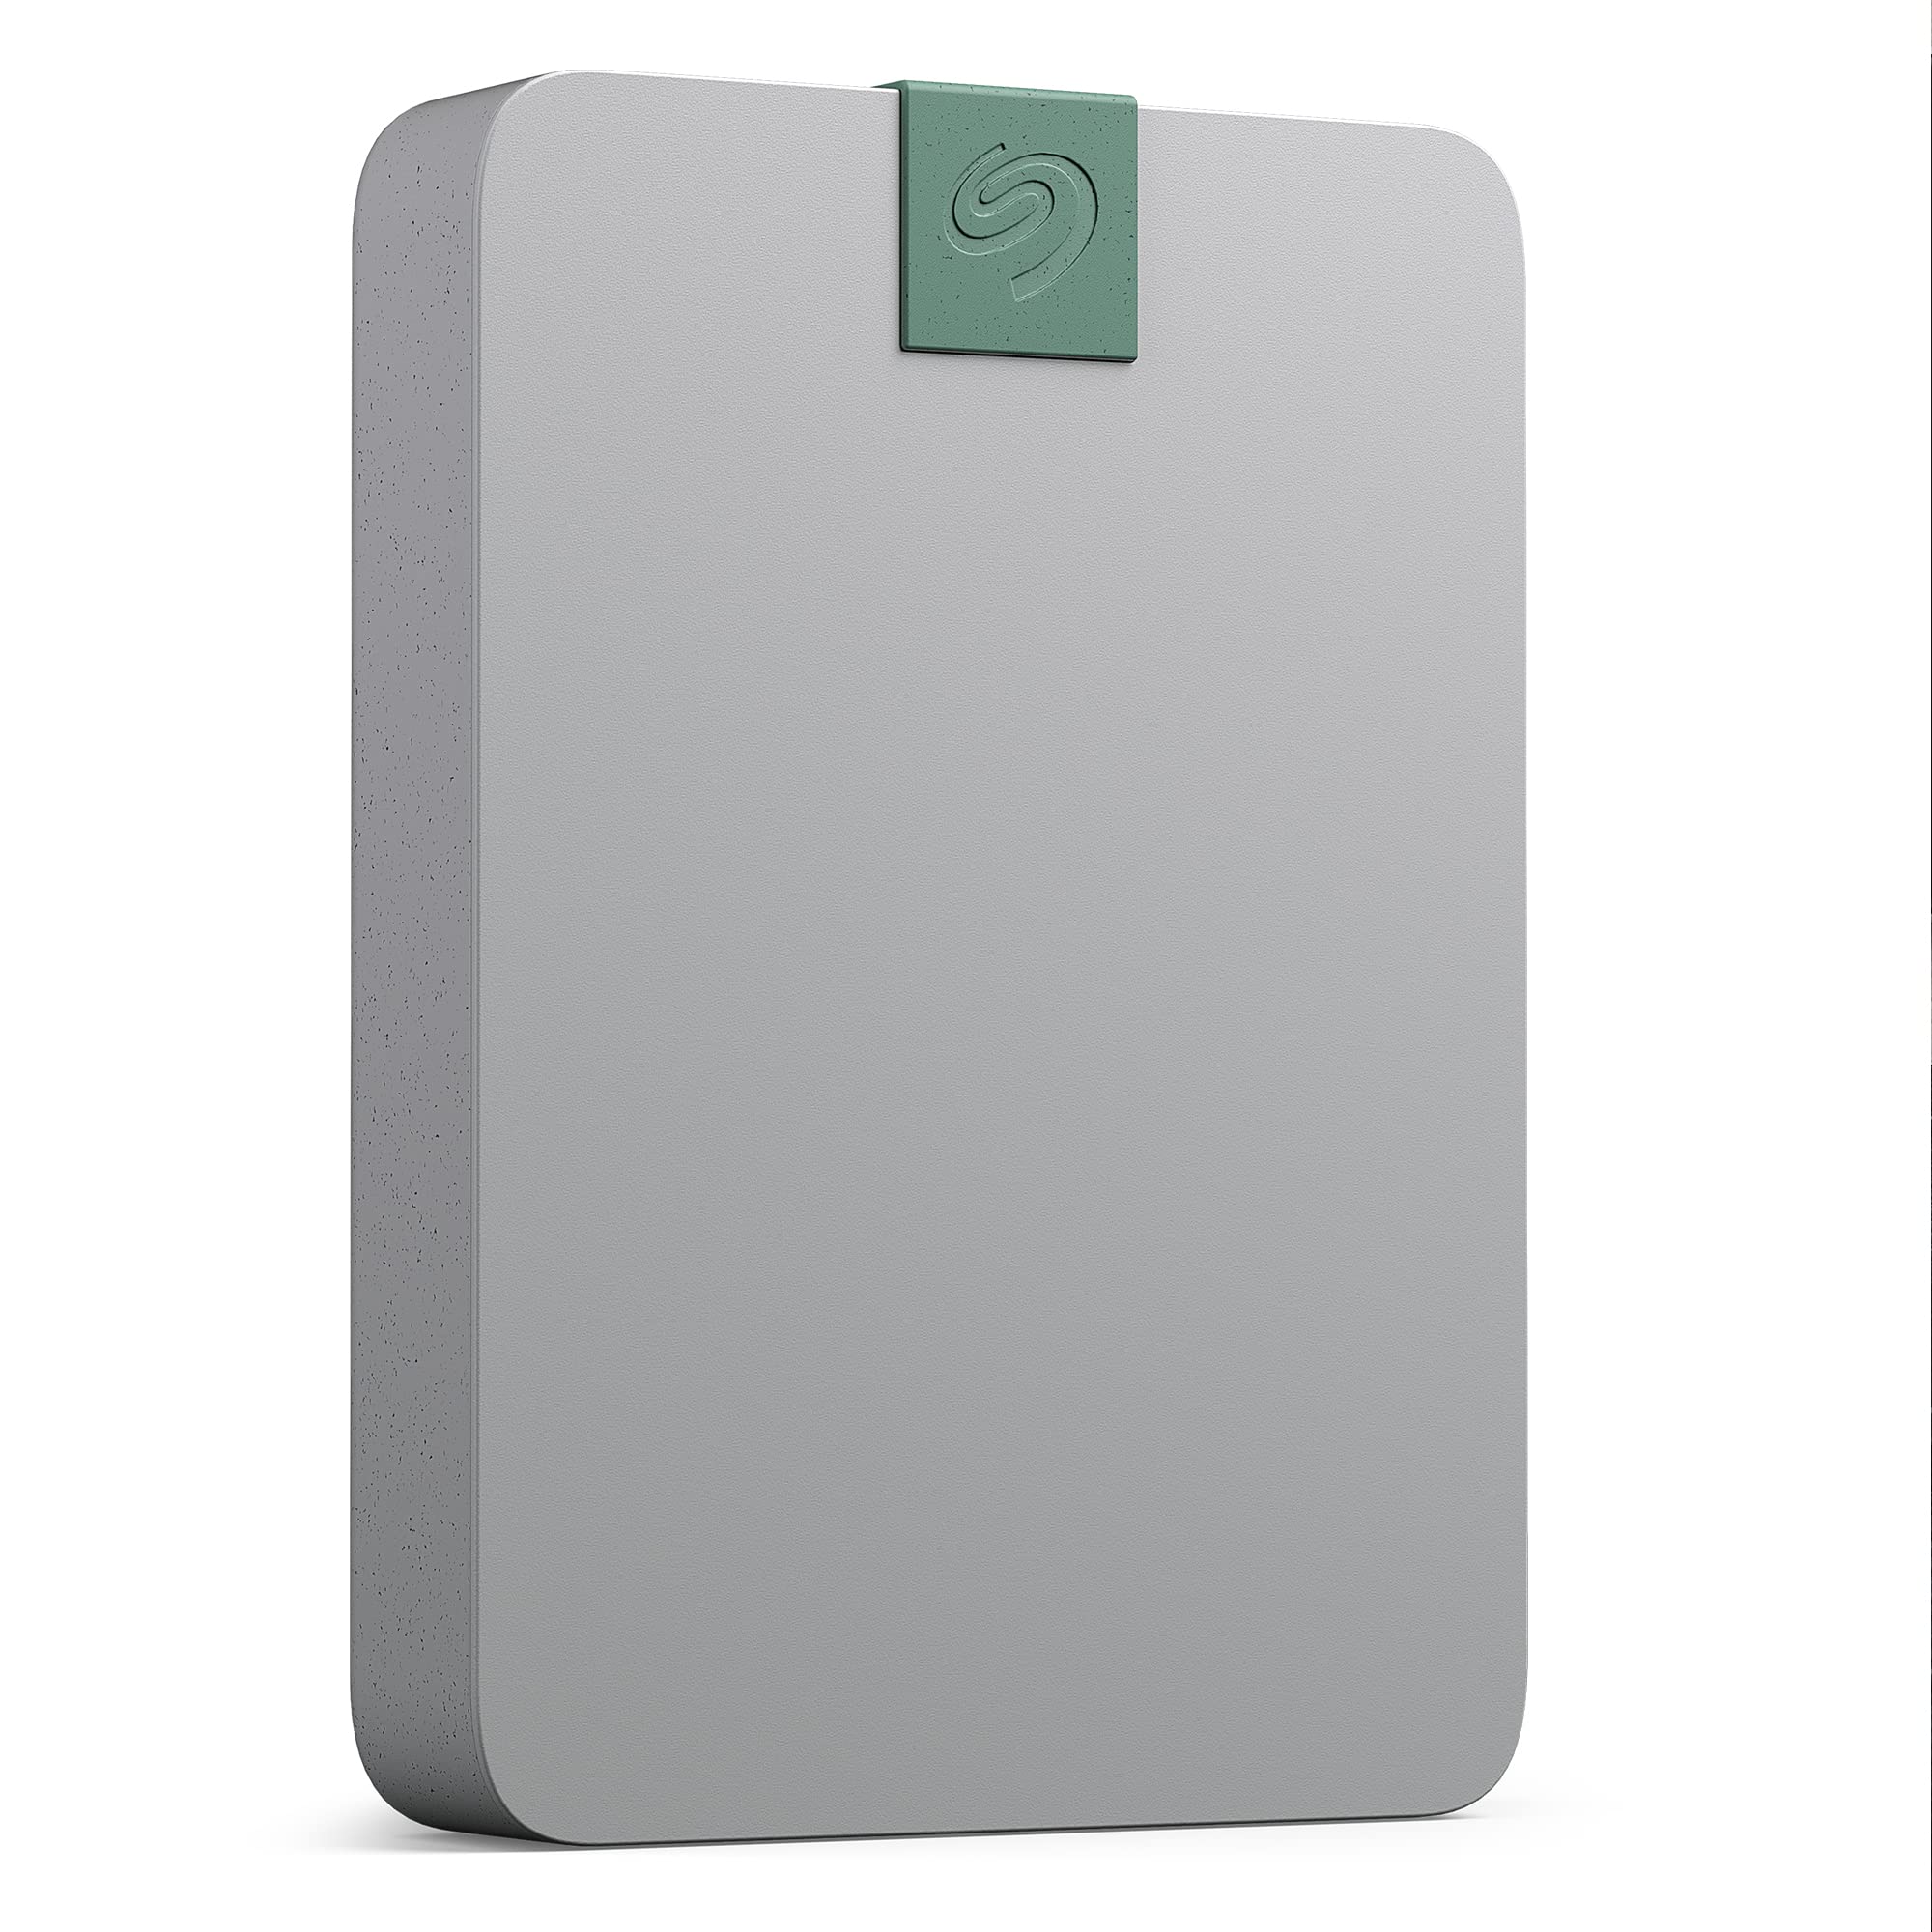 SEAGATE ULTRA TOUCH 4TB HDD